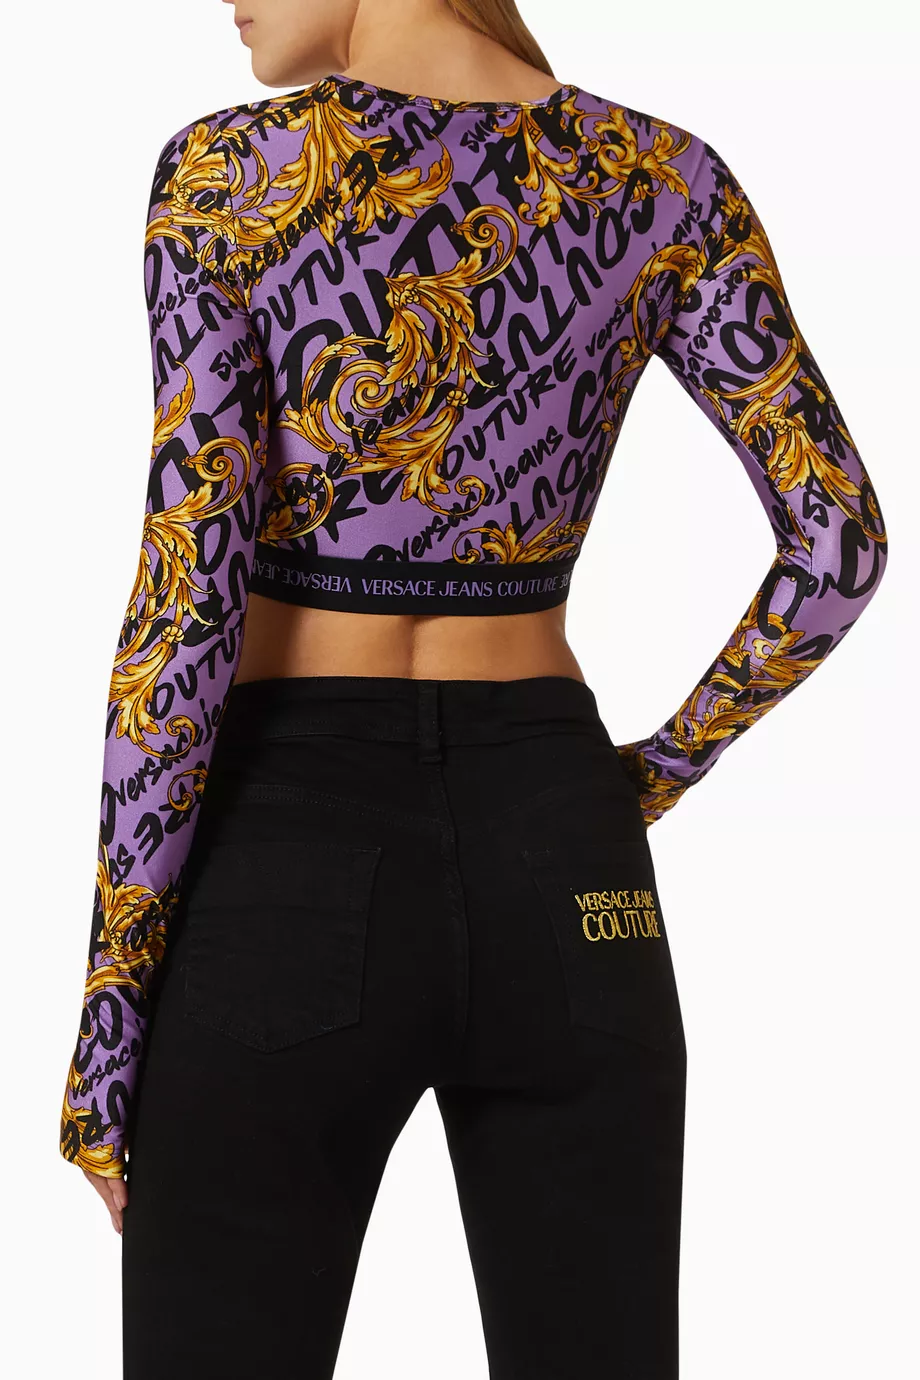 VERSACE JEANS COUTURE 新品 タグ付き 保管傷 総柄ブルゾン-